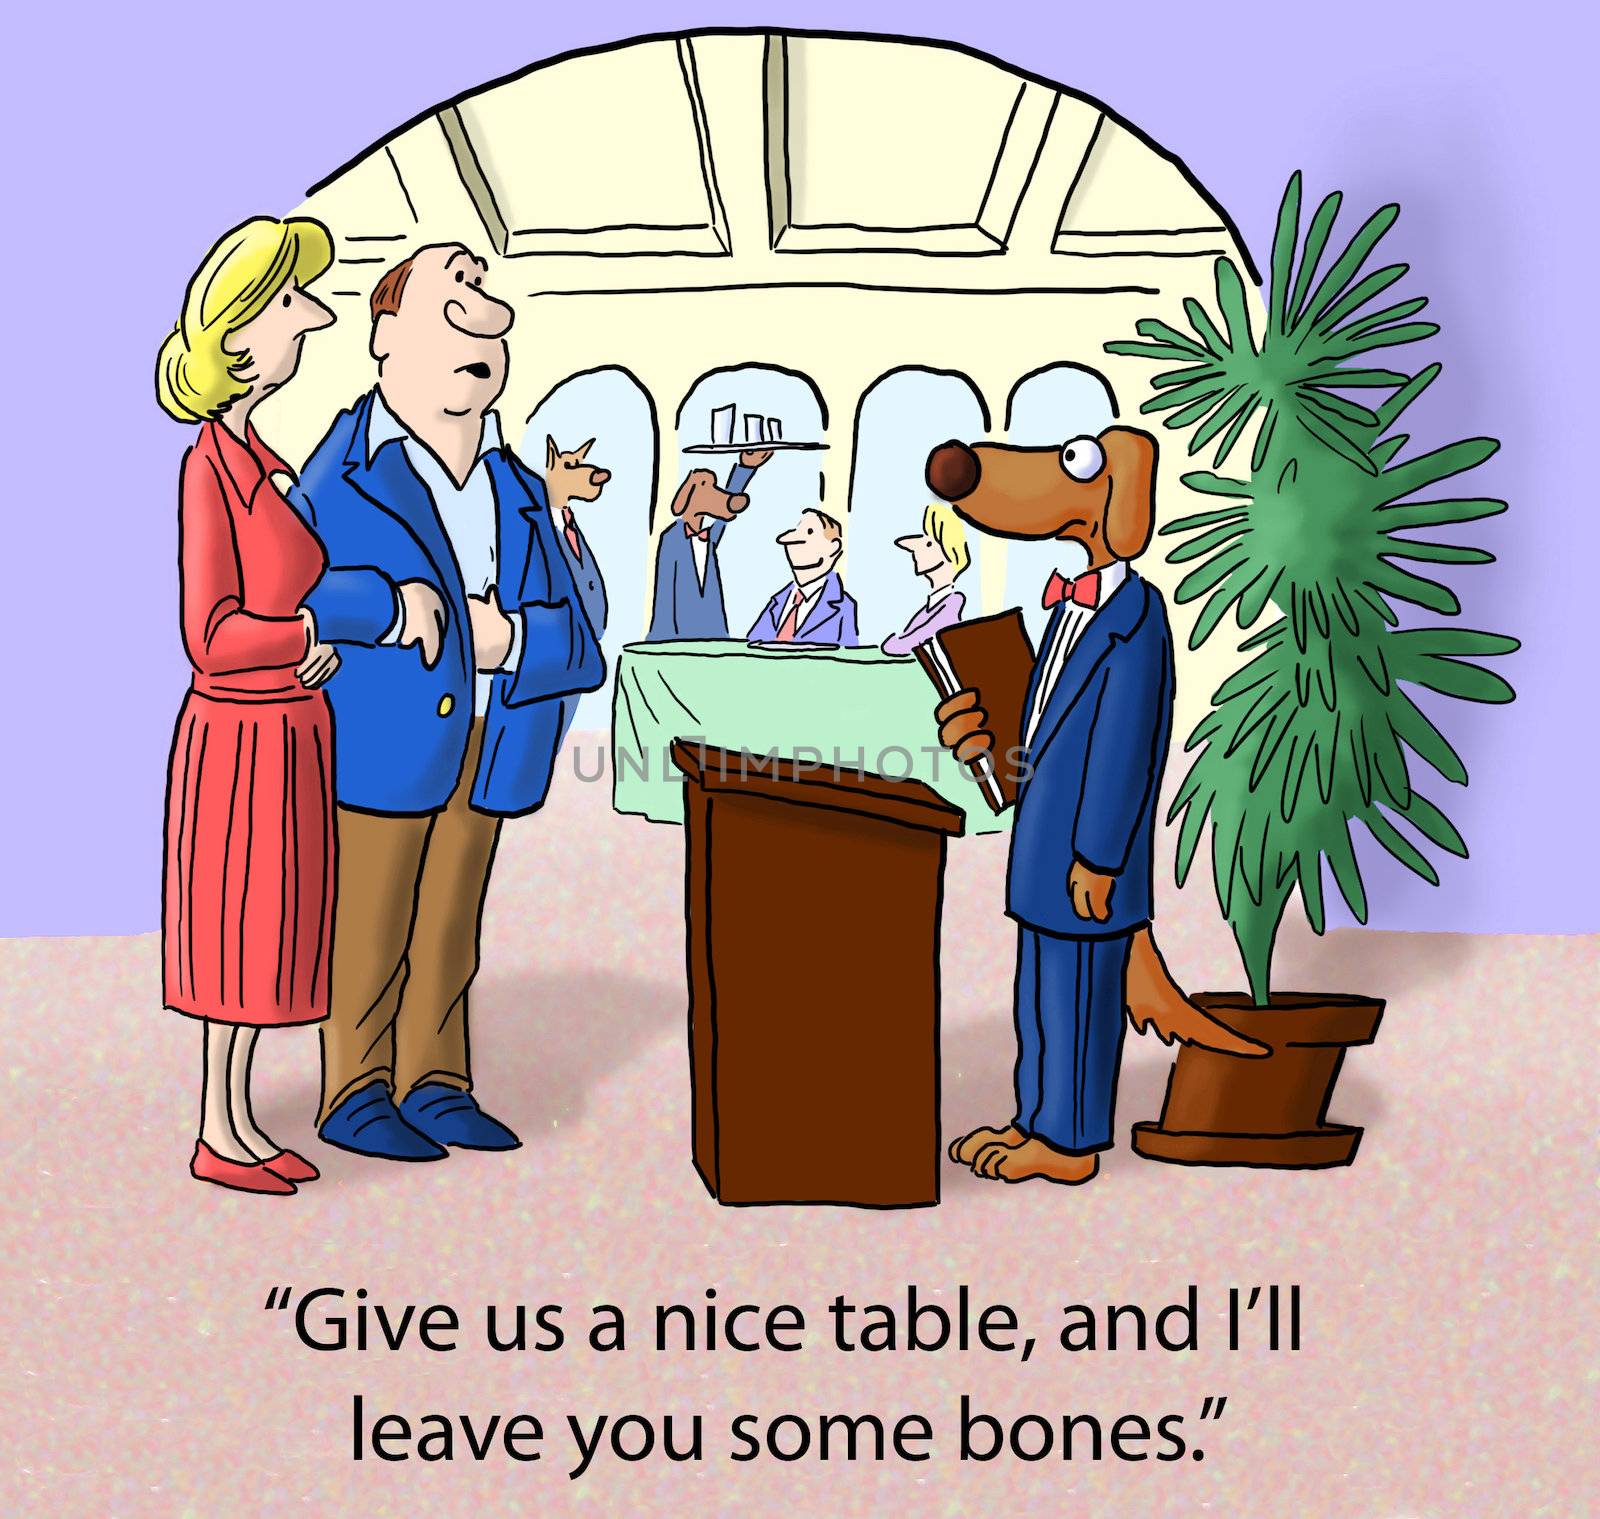 "Give us a nice table and we'll leave you some bones."